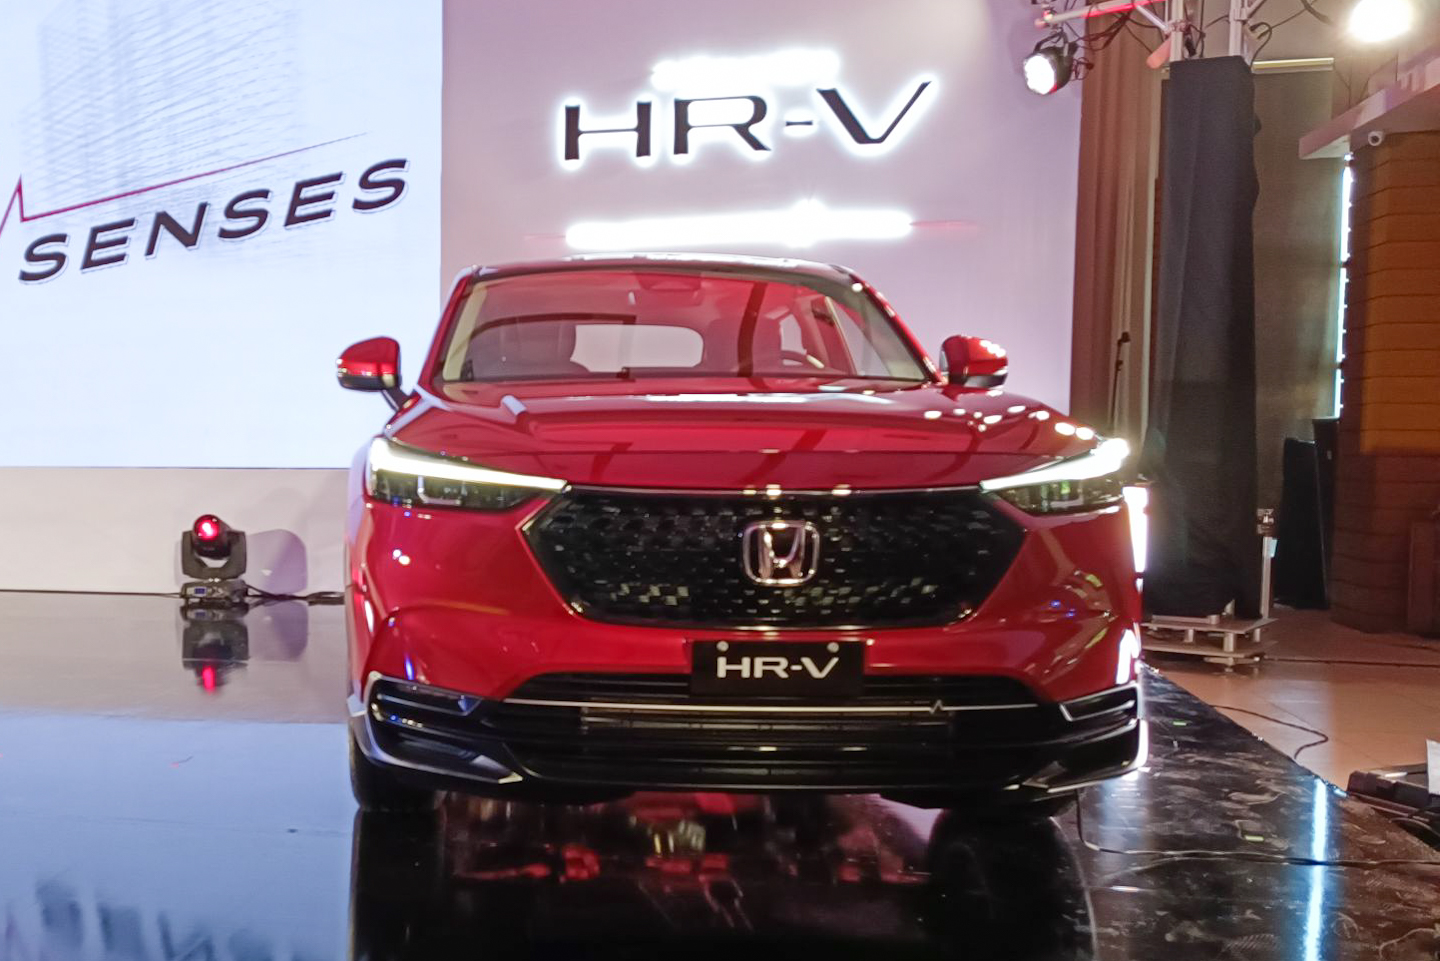 2022 Honda HR-V launched, starts at PHP 1.250M